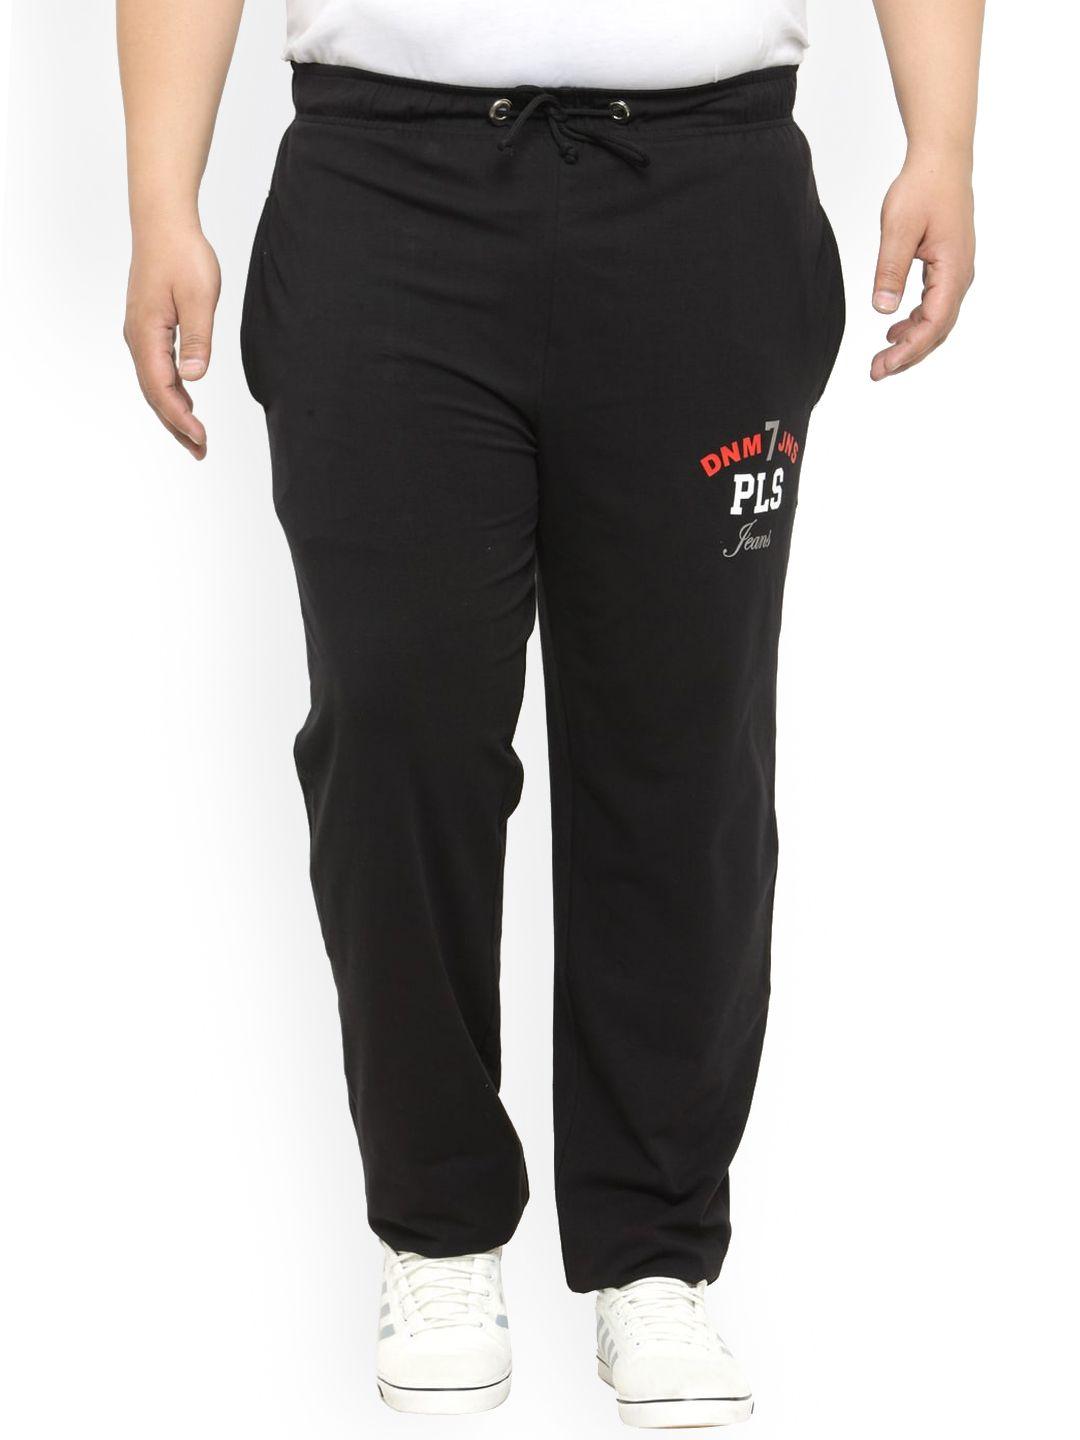 pluss-men-black-solid-staight-fit-track-pants